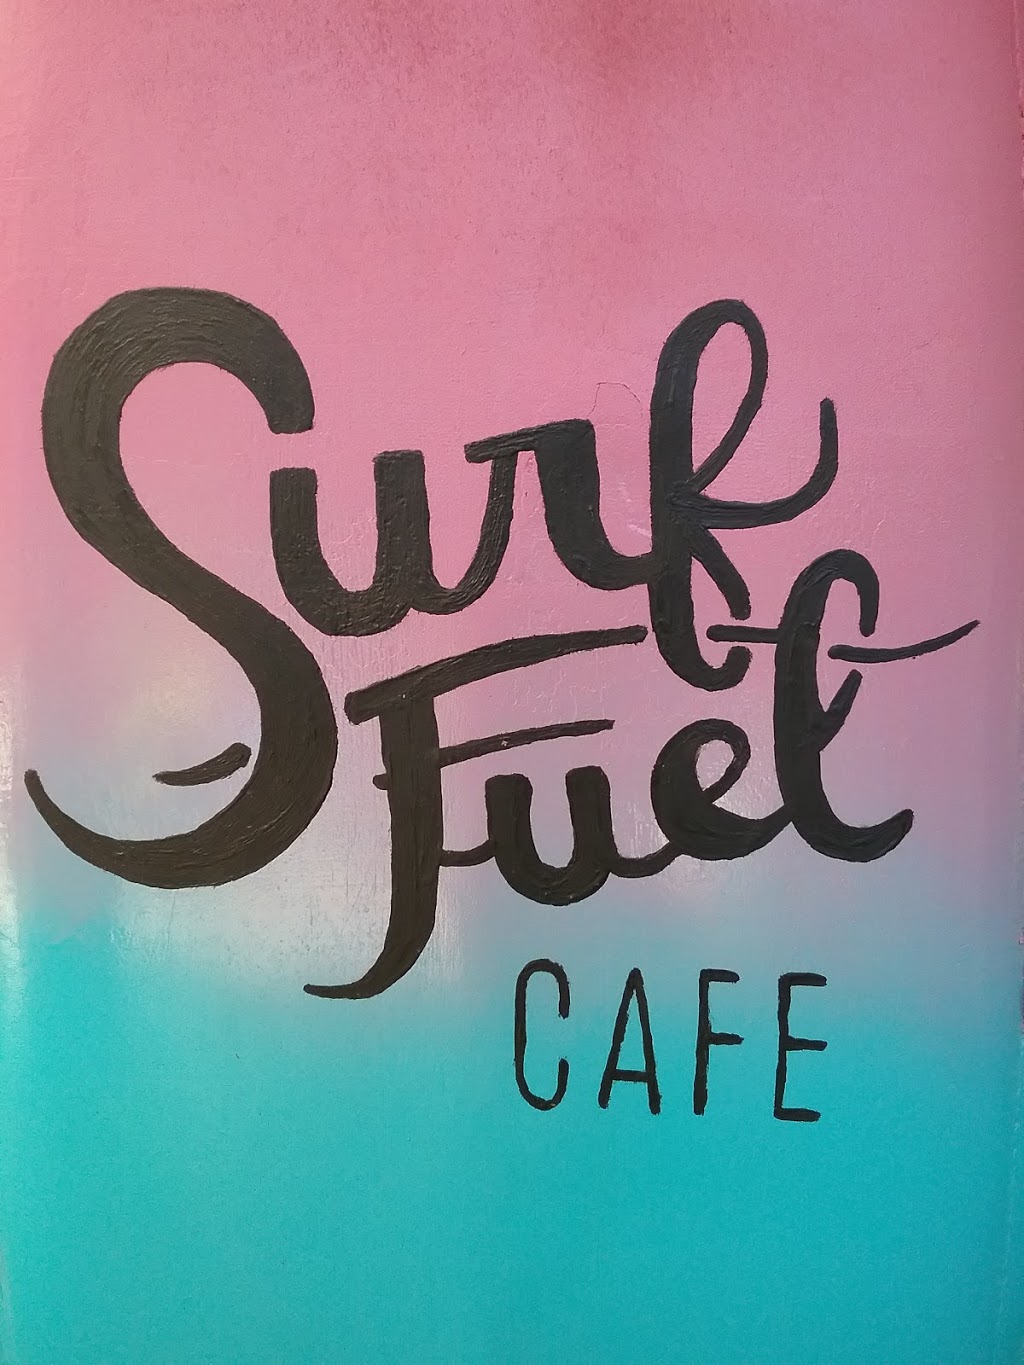 Surf Fuel Cafe | Waves Campground, 954 Point Plomer Rd, Crescent Head NSW 2440, Australia | Phone: 0422 682 949